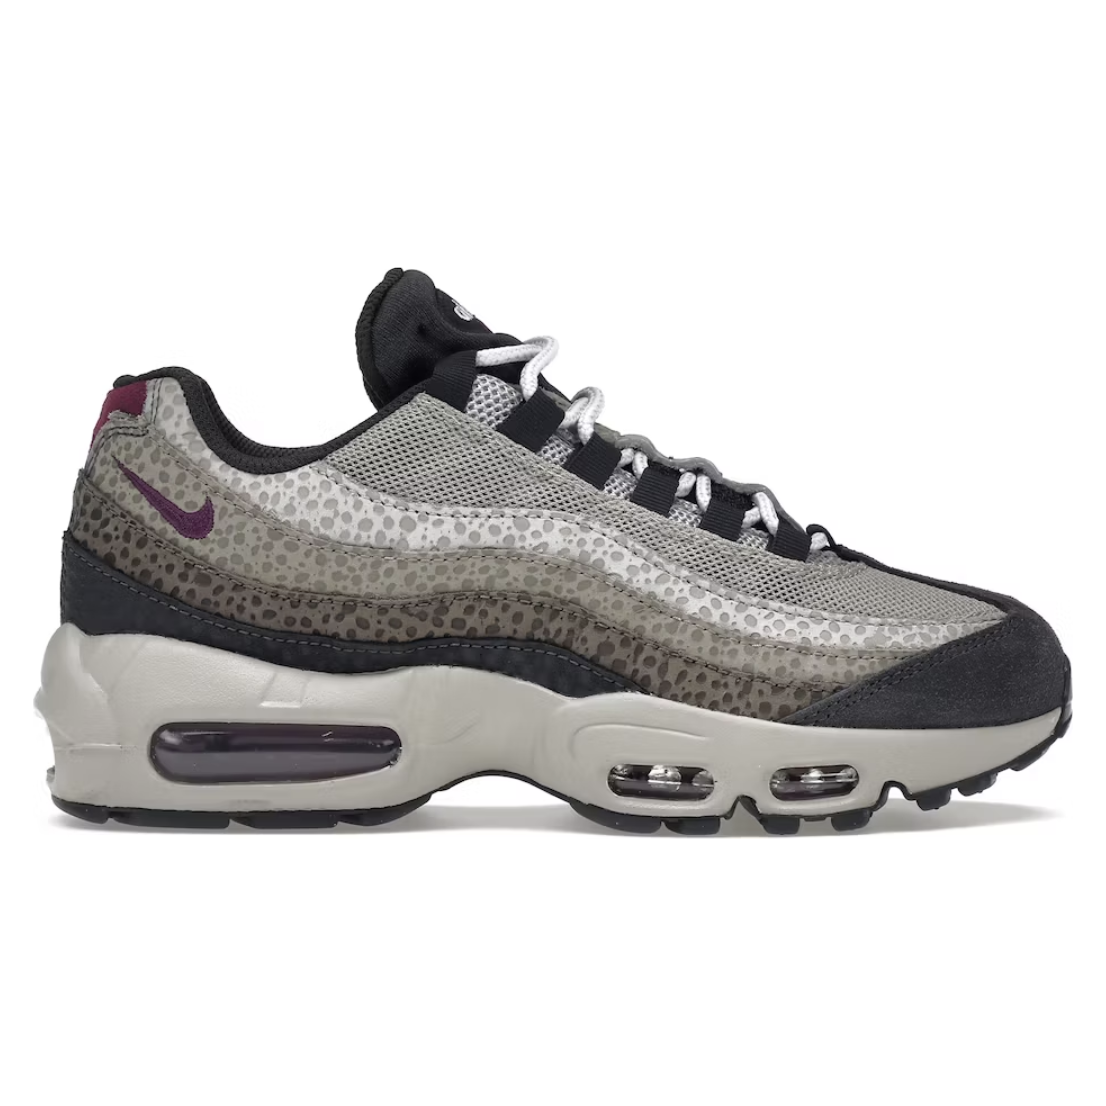 Nike Air Max 95 Viotech Anthracite (Women's) from Nike